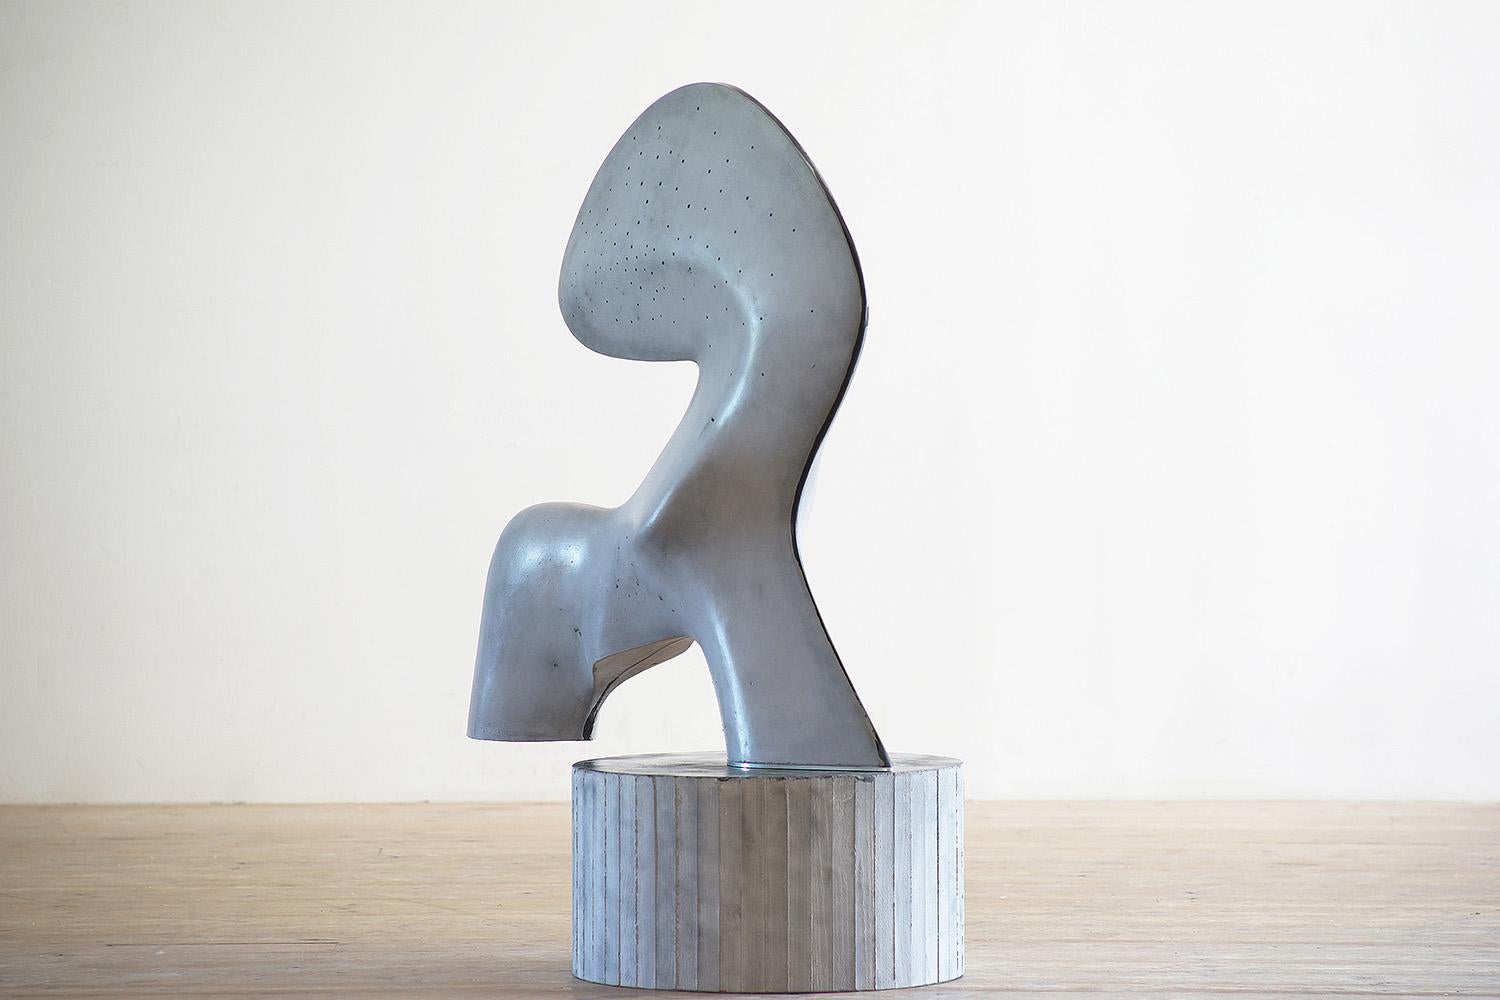 Glass fiber reinforced concrete sculpture, 130 cm × 100 cm × 58 cm. Unique work.
This sculpture is a representation of the moon, filtered by the artist’s imaginary vision giving it sinuous and organic forms. The black dots on the sculpture are